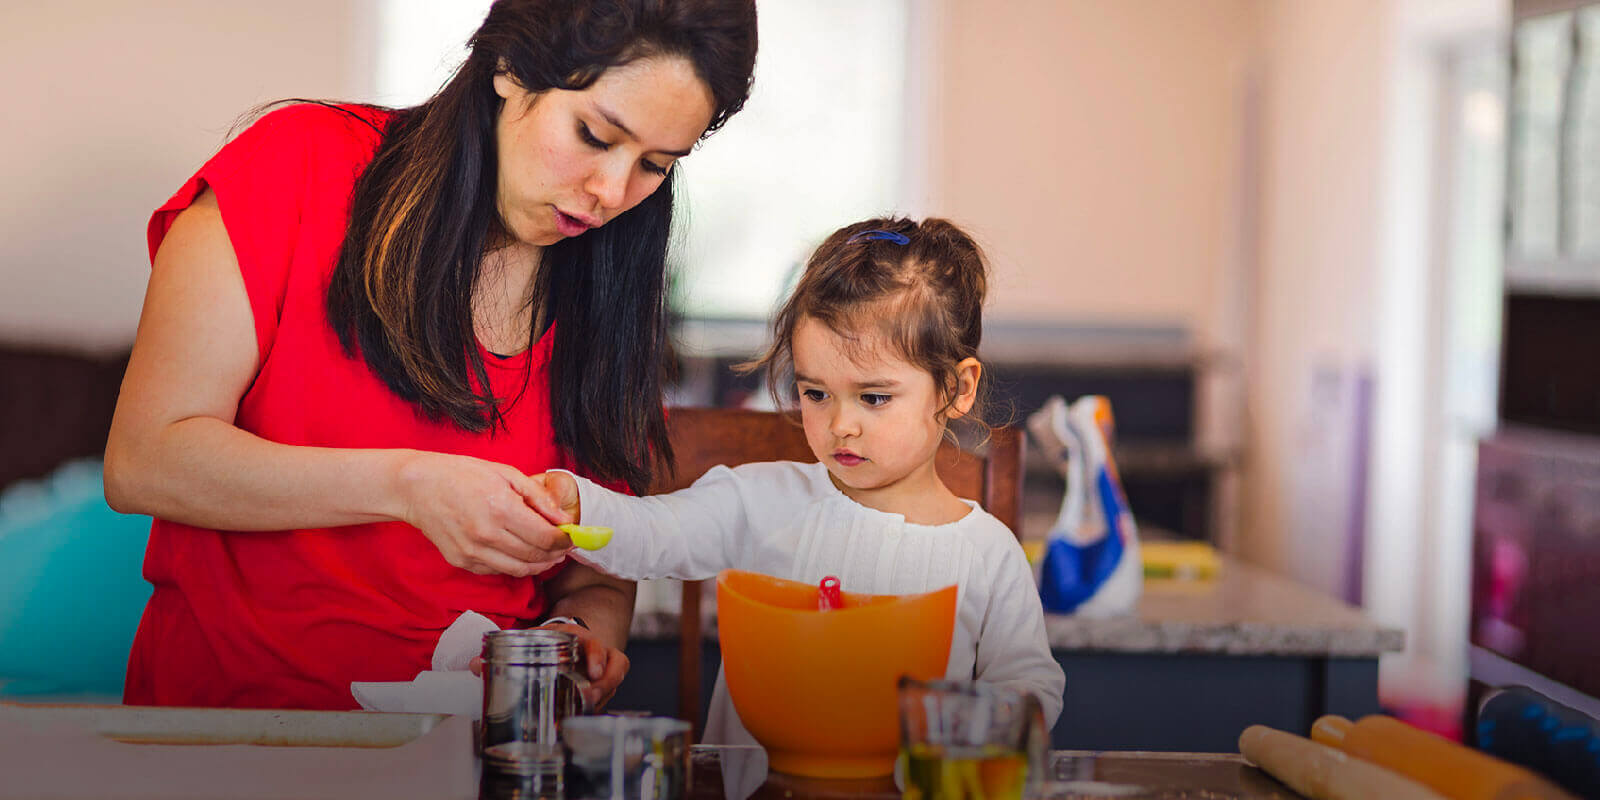 Stock photo of mother and daughter cooking together